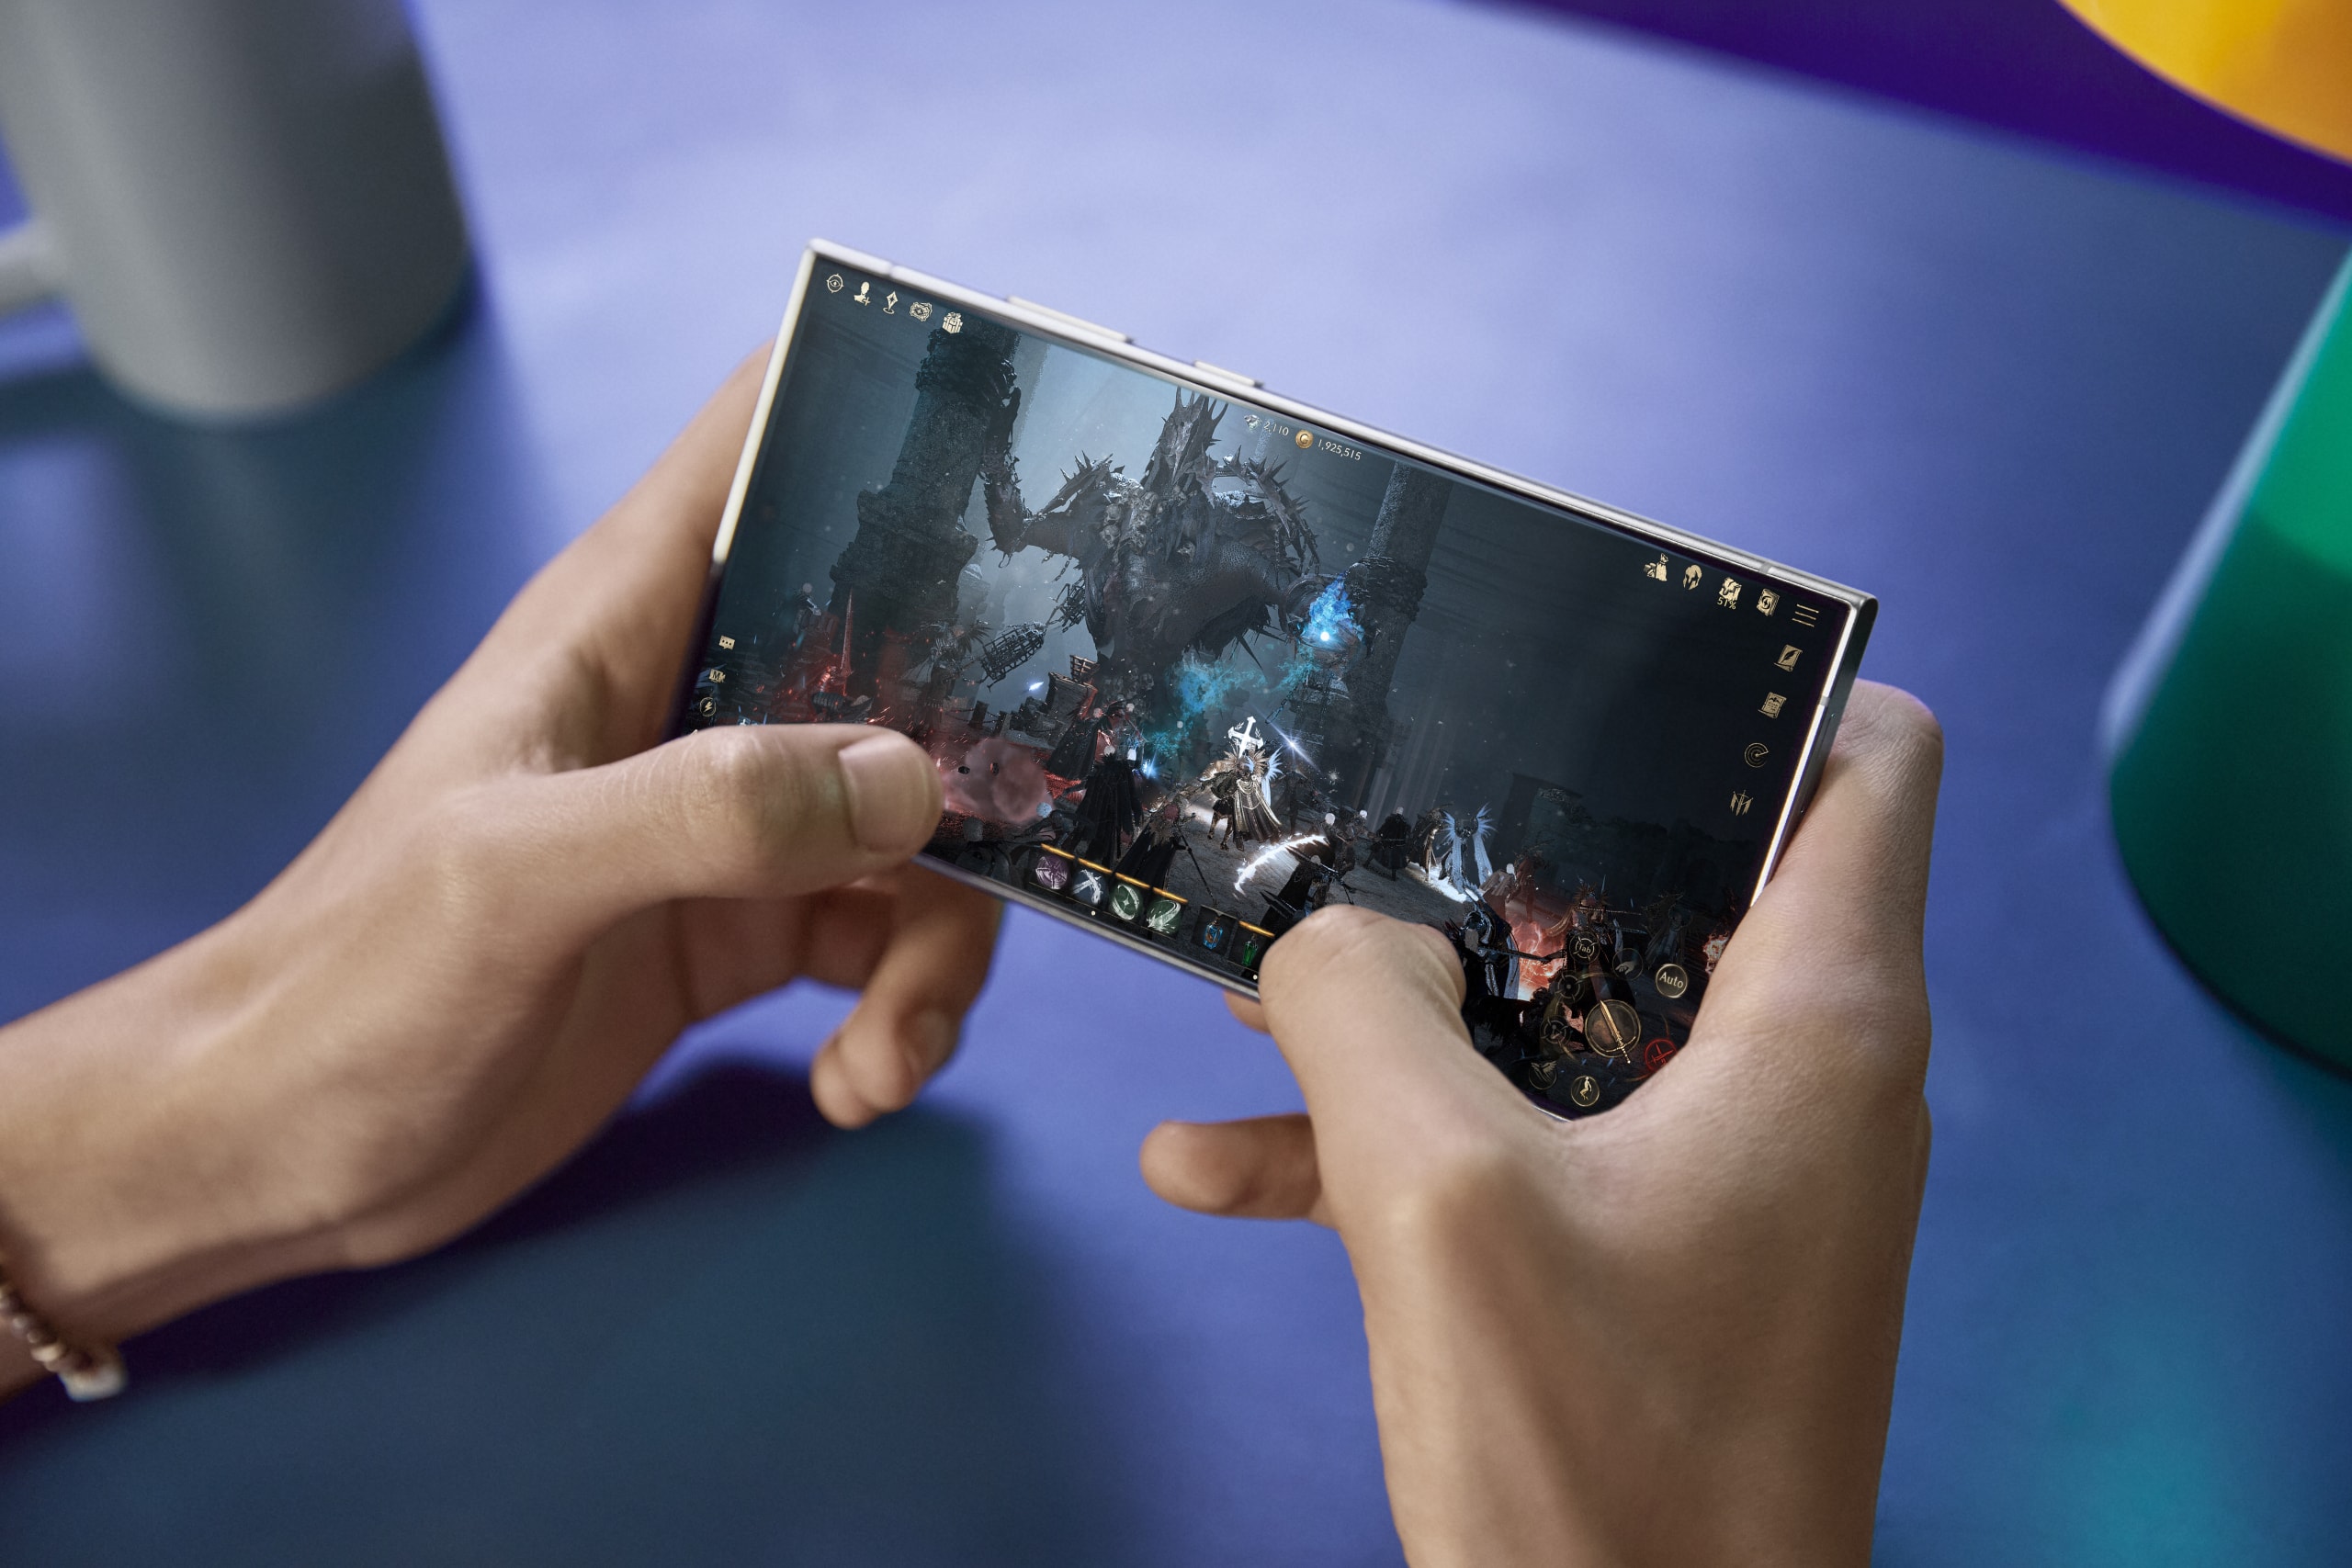 Samsung Announces its Latest Galaxy S24 Series of Smartphones Gaming Phone Qualcomm SnapDragon Gen 3